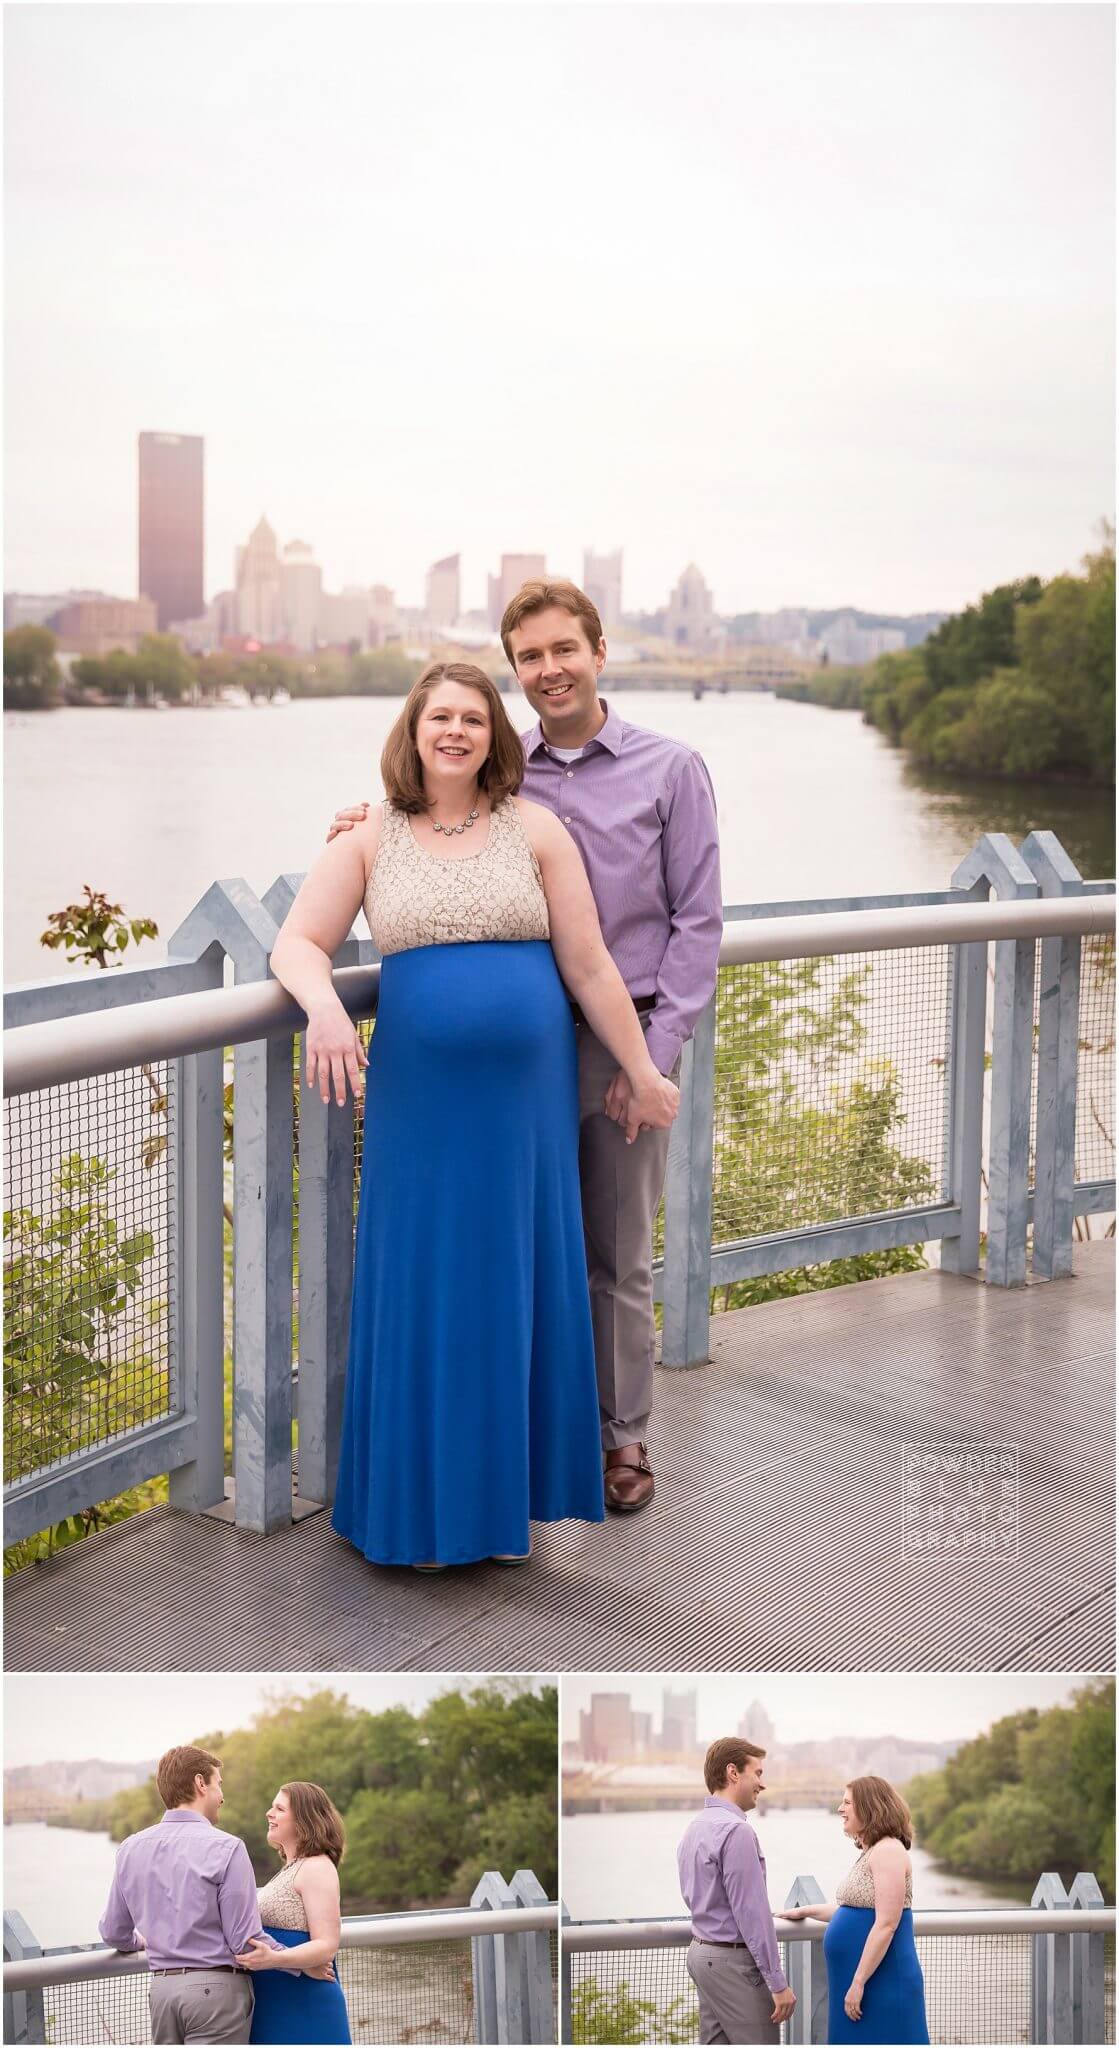 pittsburgh maternity photography session. fitness themed maternity photography portrait session overlooking pittsburgh skyline.